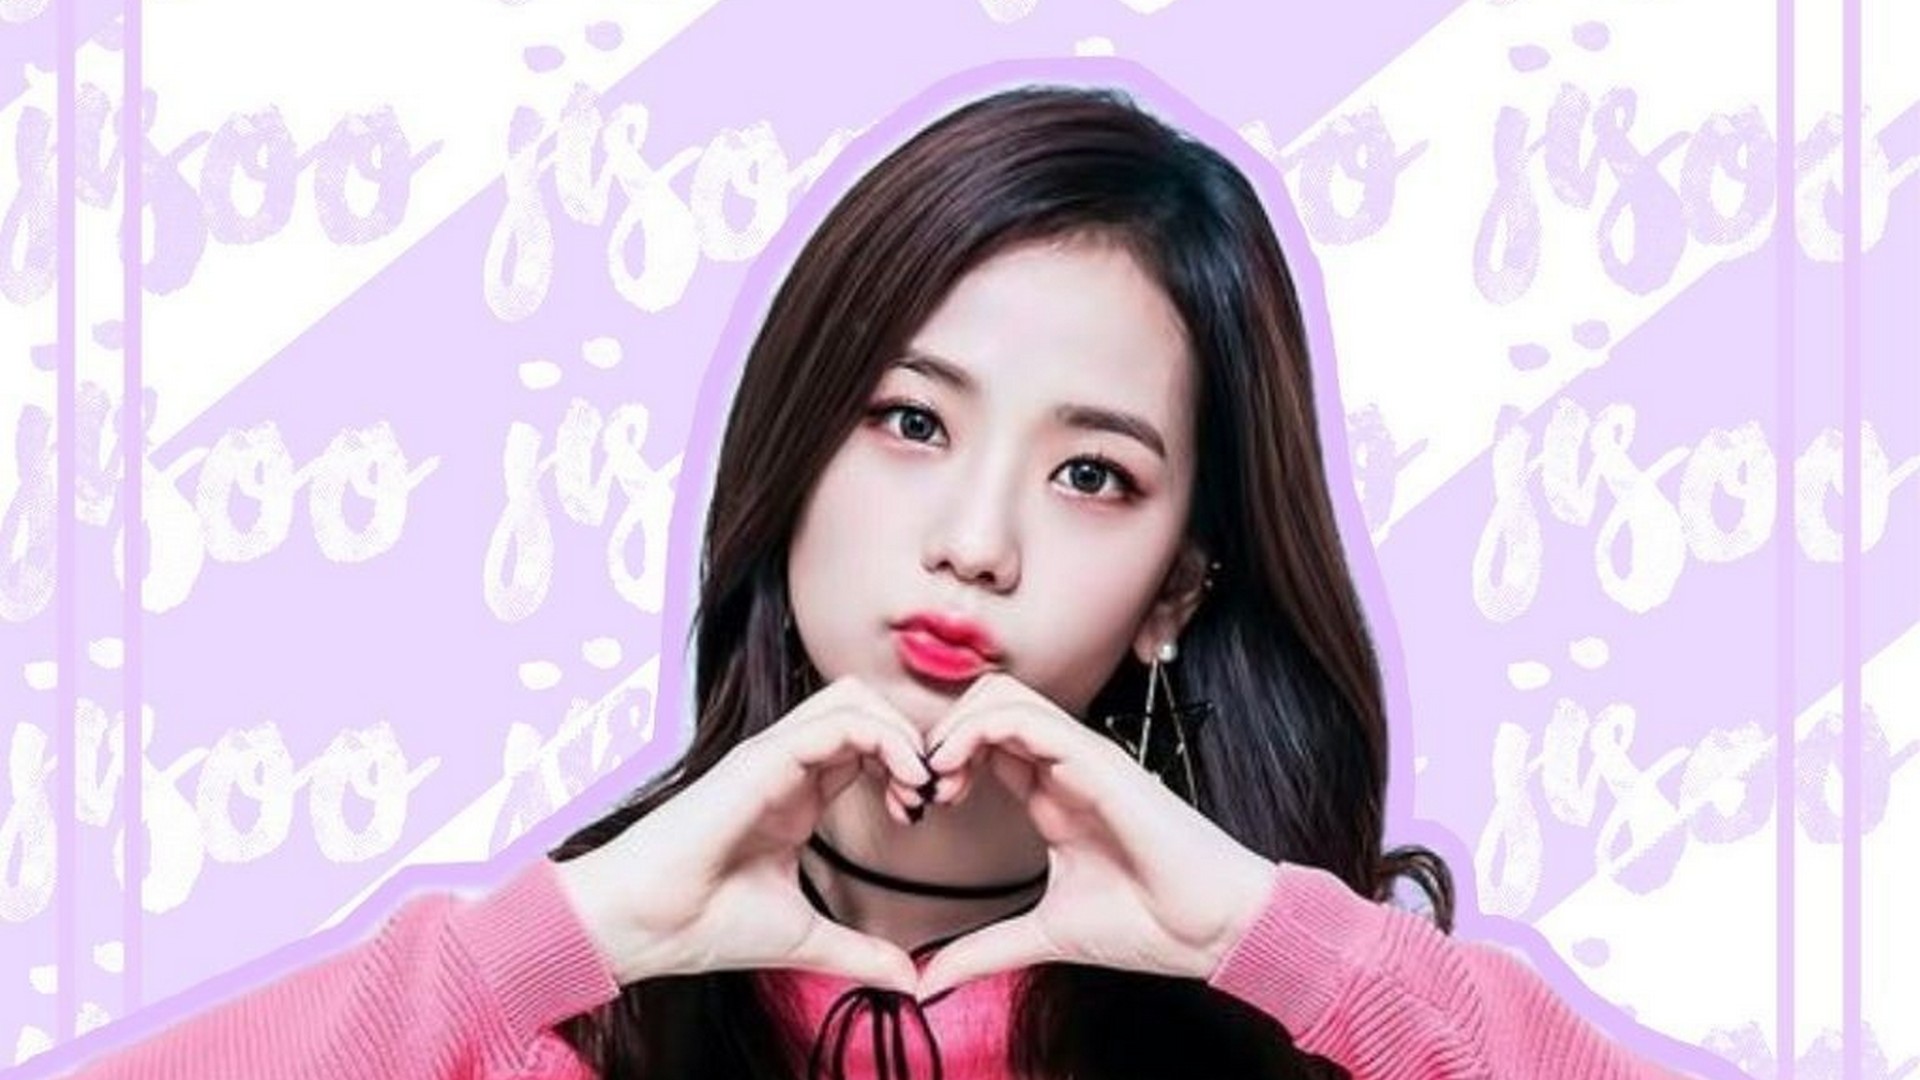 Jisoo Blackpink Wallpaper With high-resolution 1920X1080 pixel. You can use this wallpaper for your Desktop Computer Backgrounds, Mac Wallpapers, Android Lock screen or iPhone Screensavers and another smartphone device